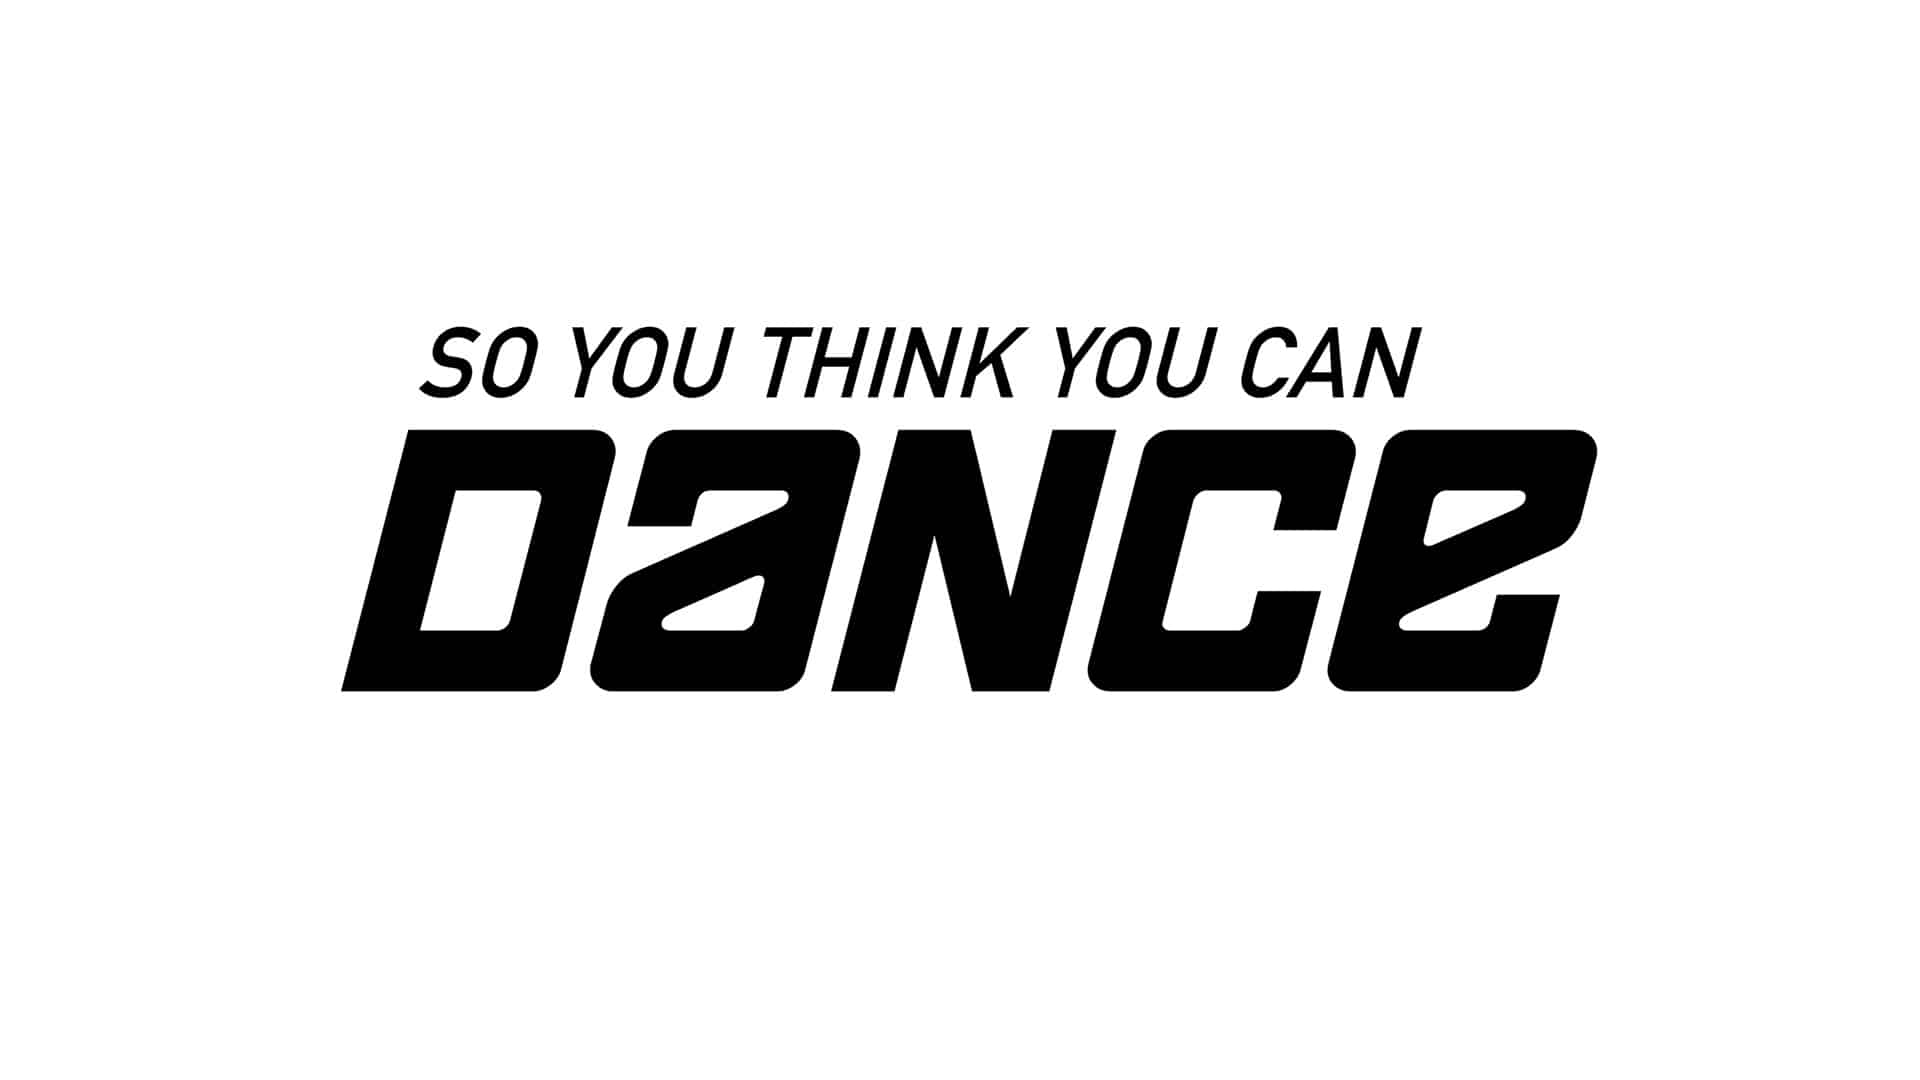 So You Think You Can Dance Returns to Fox